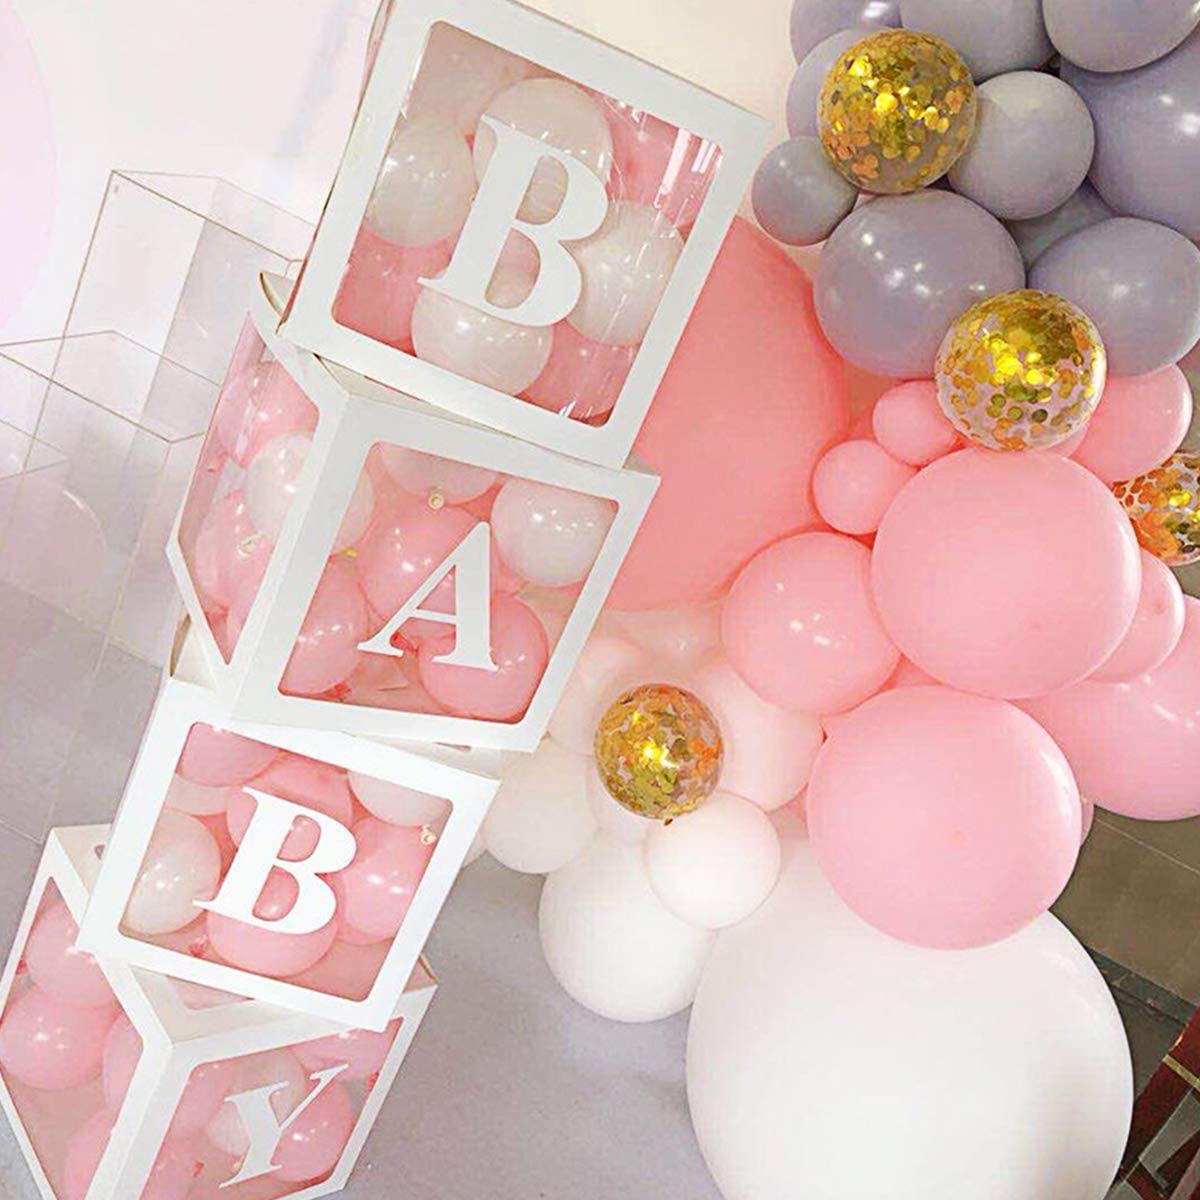 BabyShower Box Set of 4 Clear Baby Block Boxes with Baby Letters Party Decoration - Transparent Ballon Boxes Backdrop - Baby Shower & Birthday Party